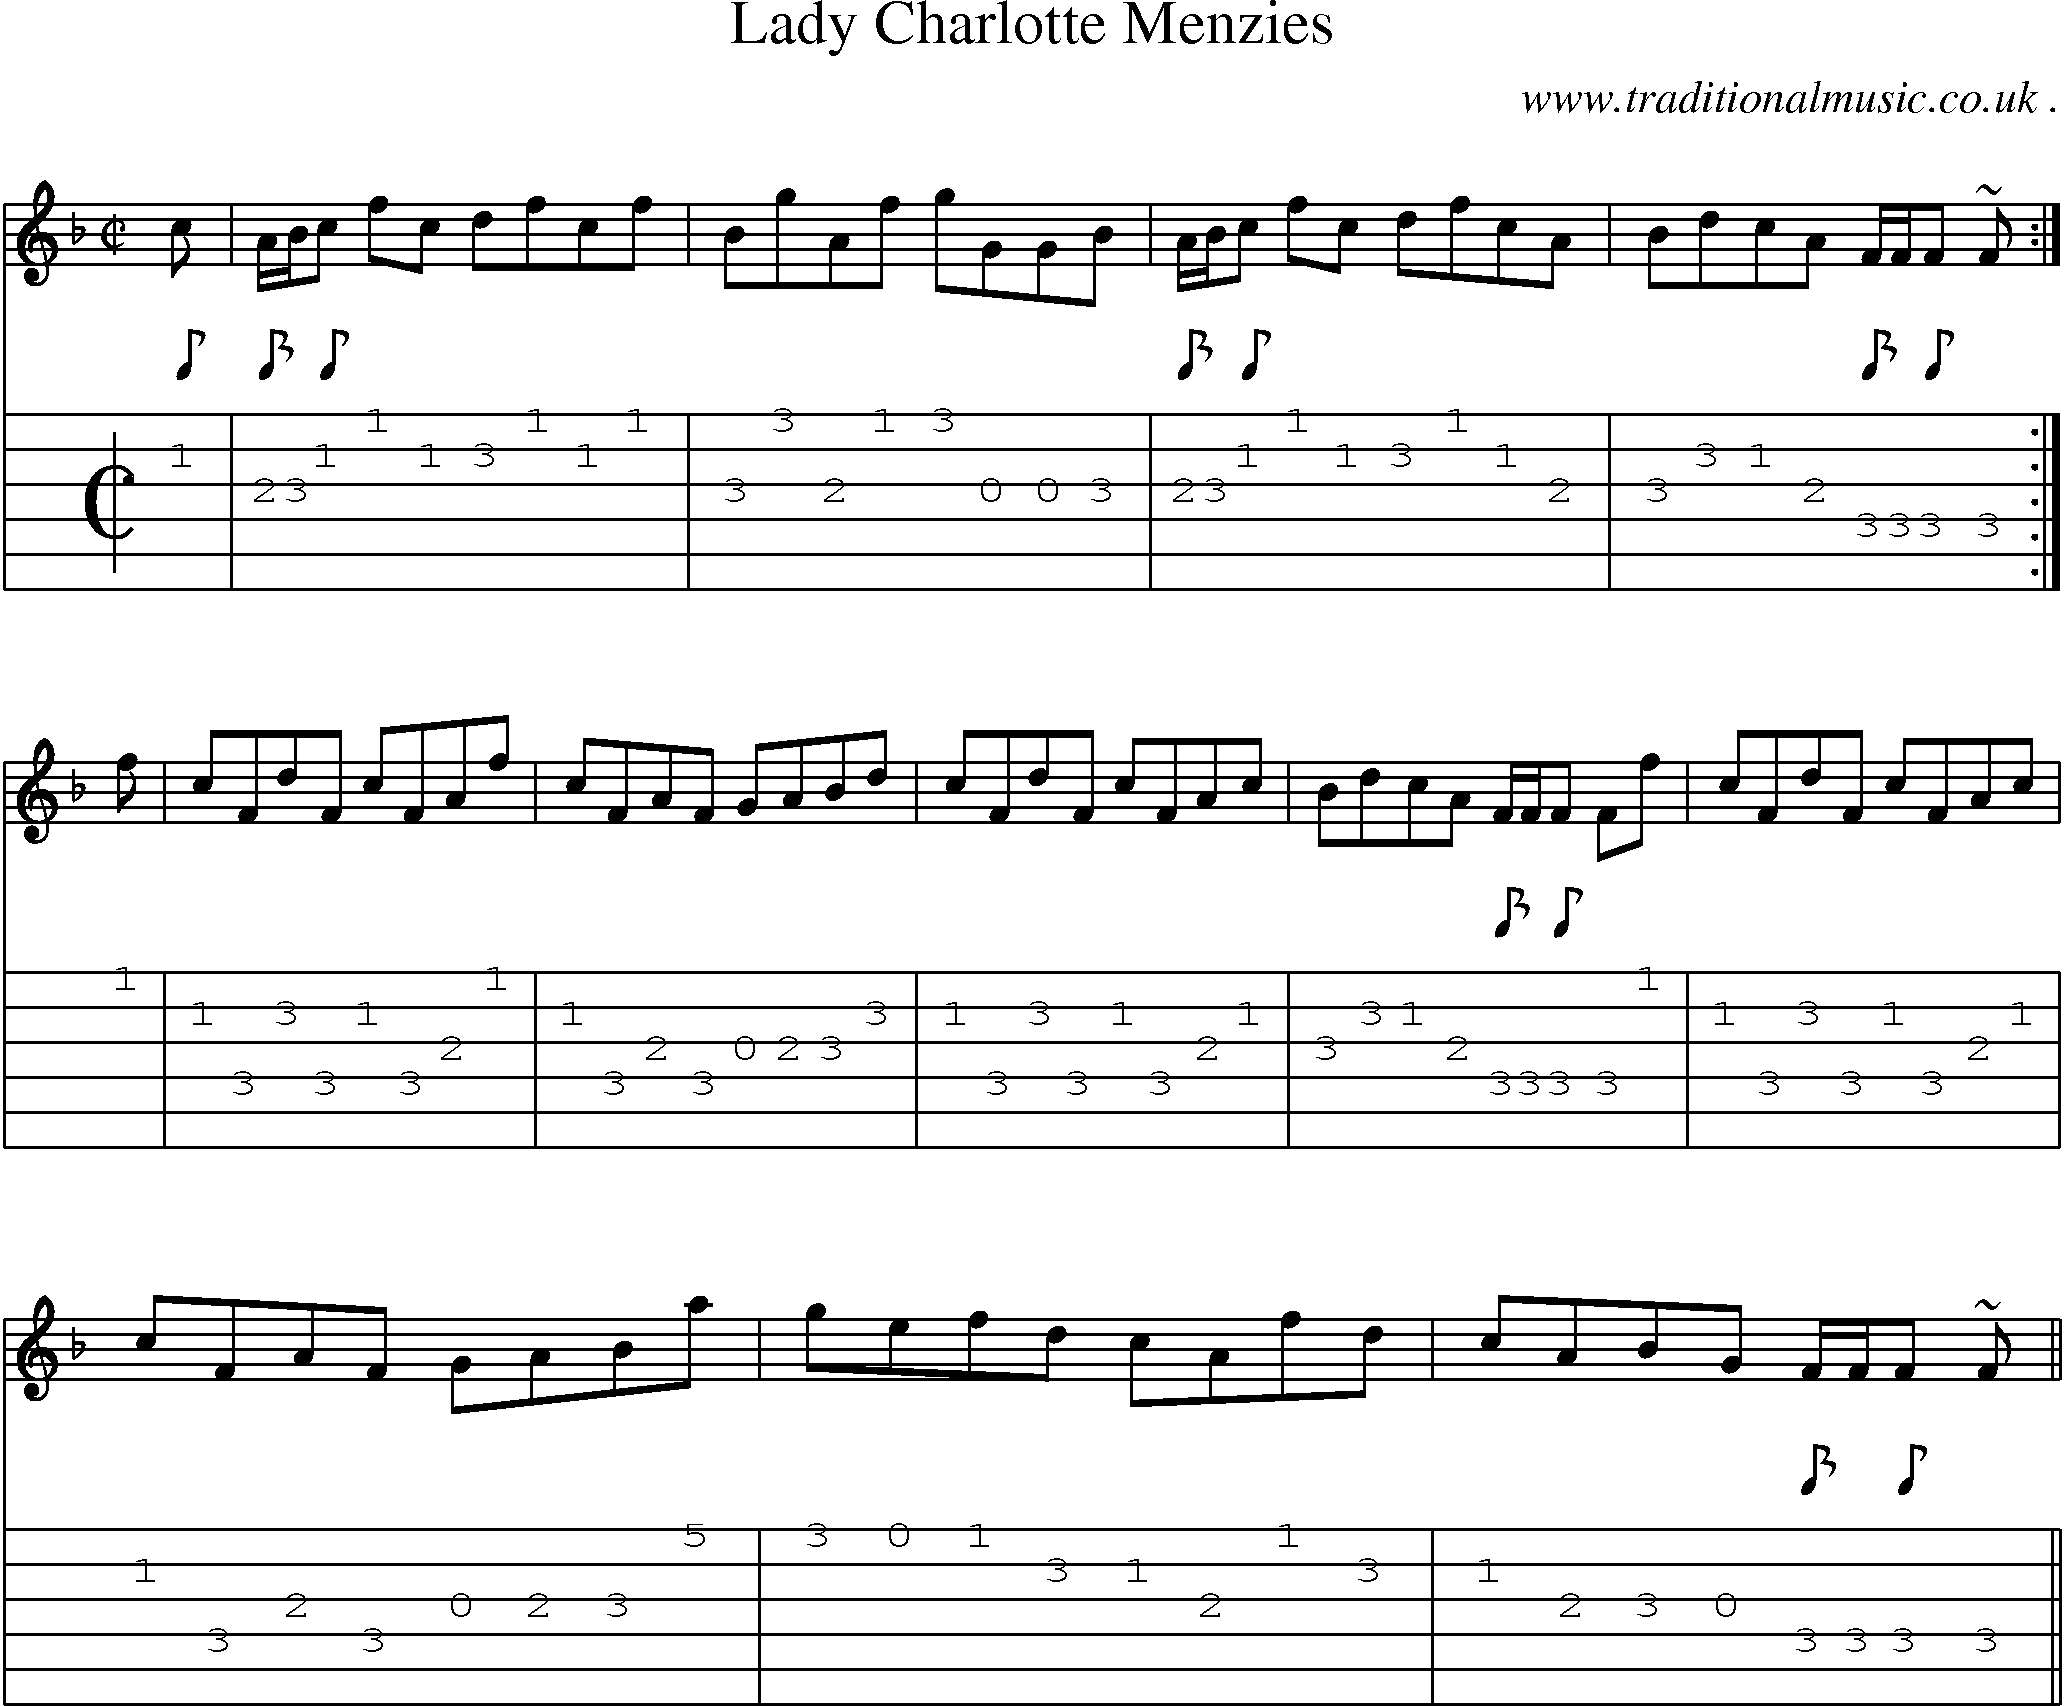 Sheet-music  score, Chords and Guitar Tabs for Lady Charlotte Menzies